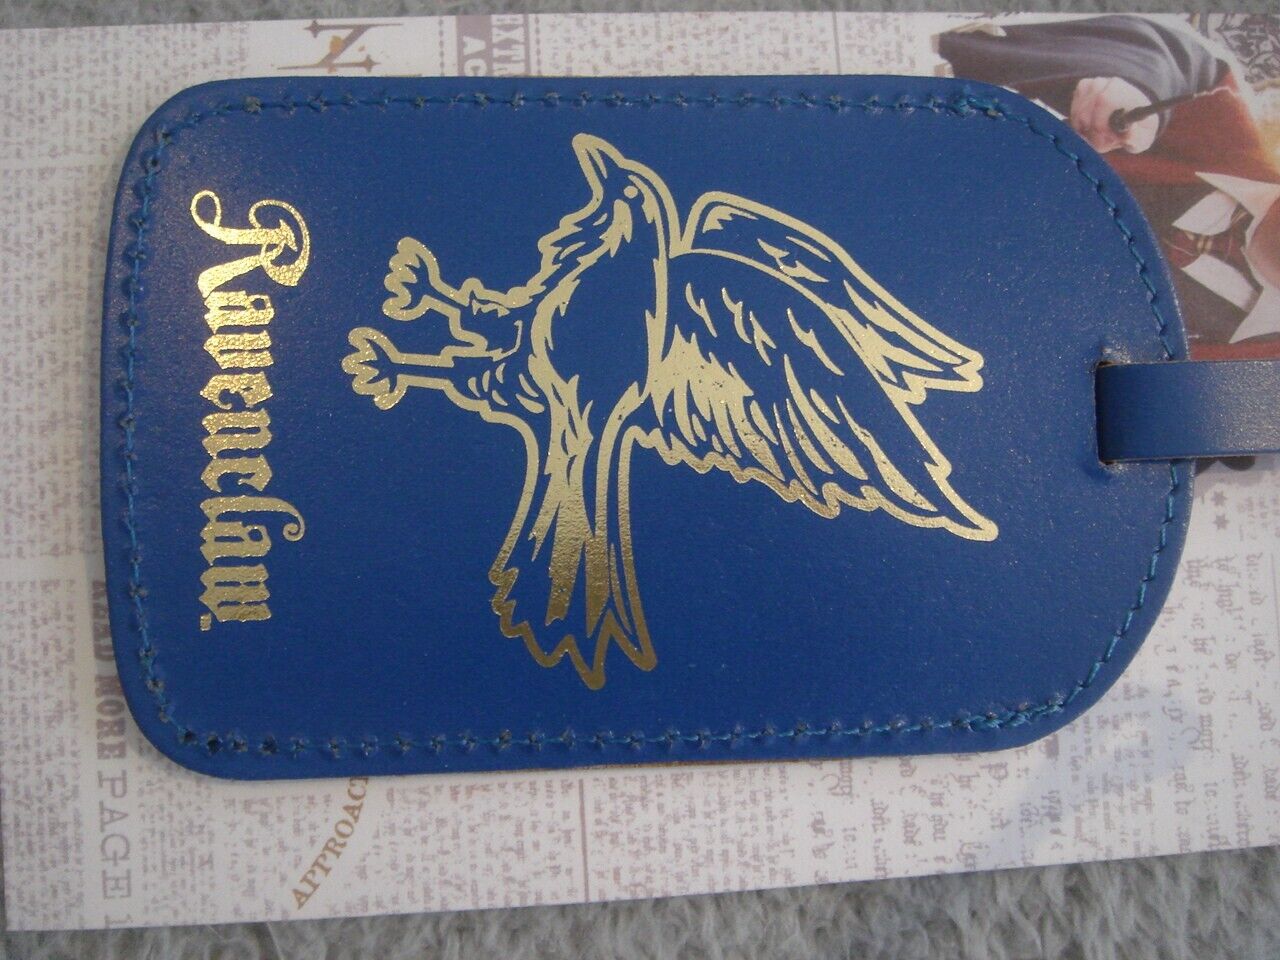 BNWT HARRY POTTER  RAVENCLAW  LUGGAGE TAG  OFFICIAL  RECYCLED LEATHER  HOGWARTS